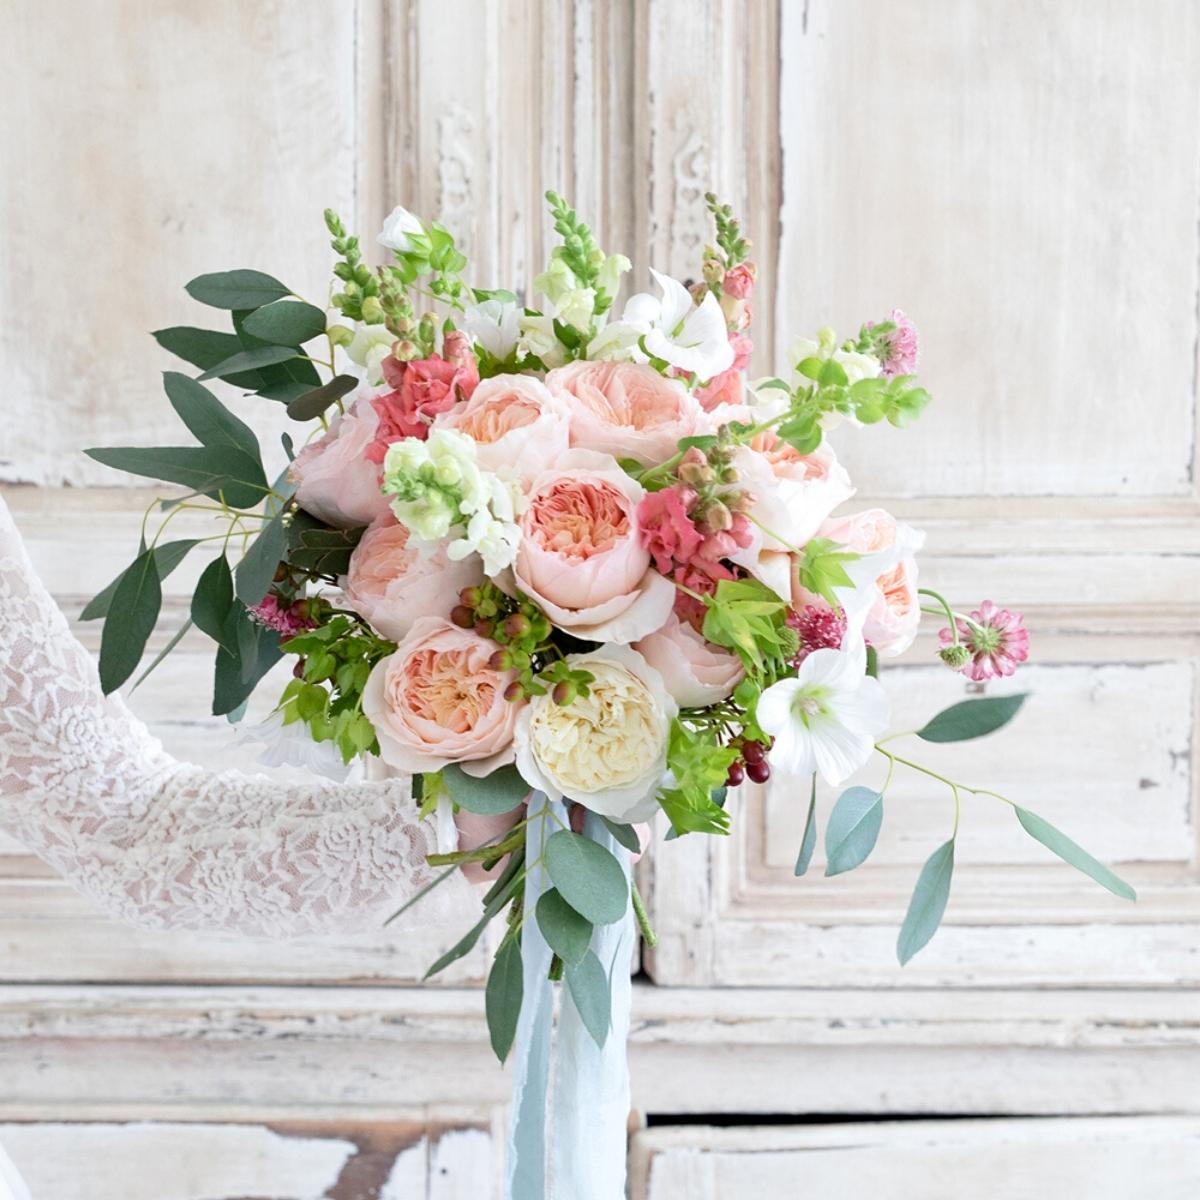 everyone-falls-for-david-austin-wedding-roses-but-where-can-you-buy-them-featured